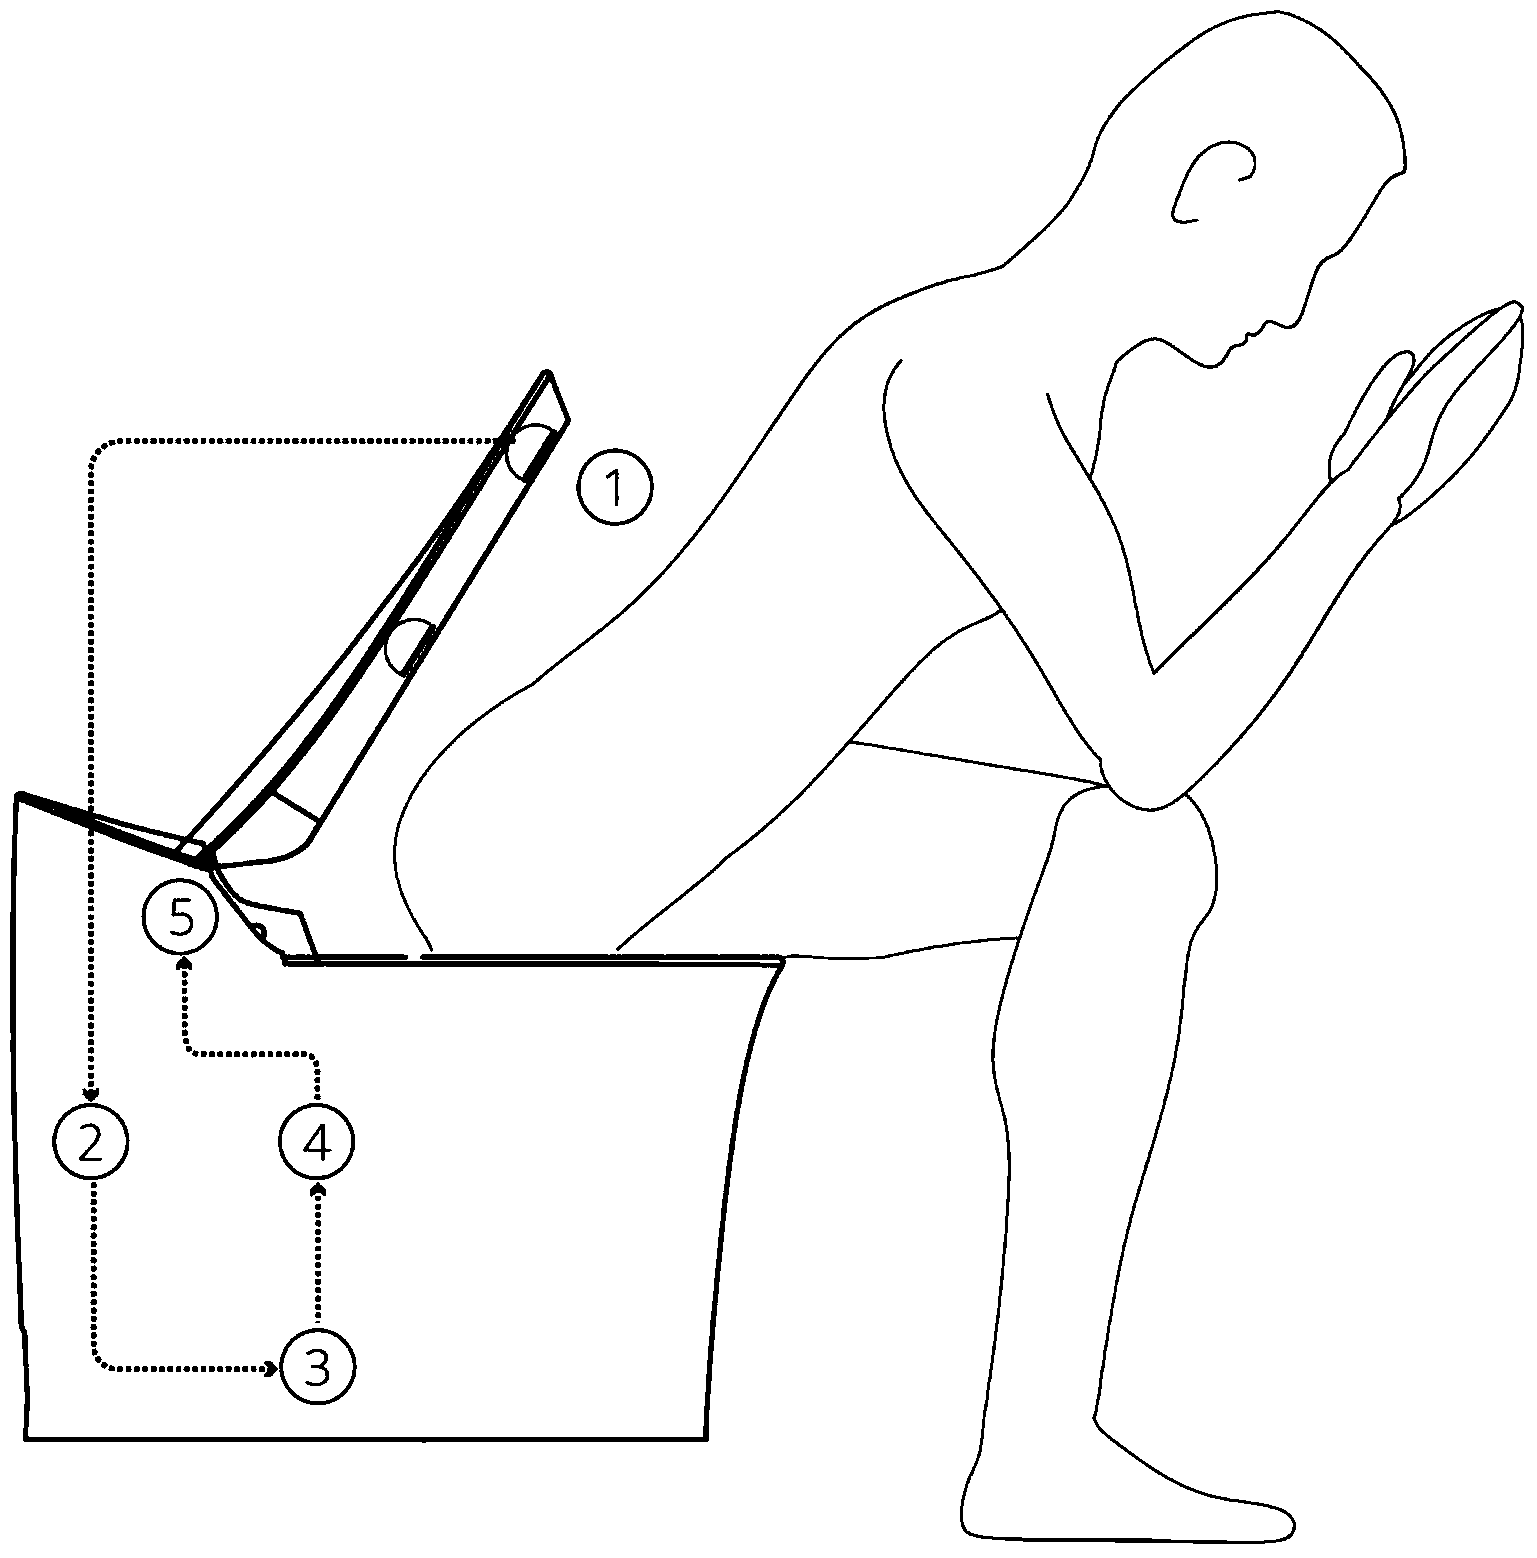 Sitting posture prompting device for toilet